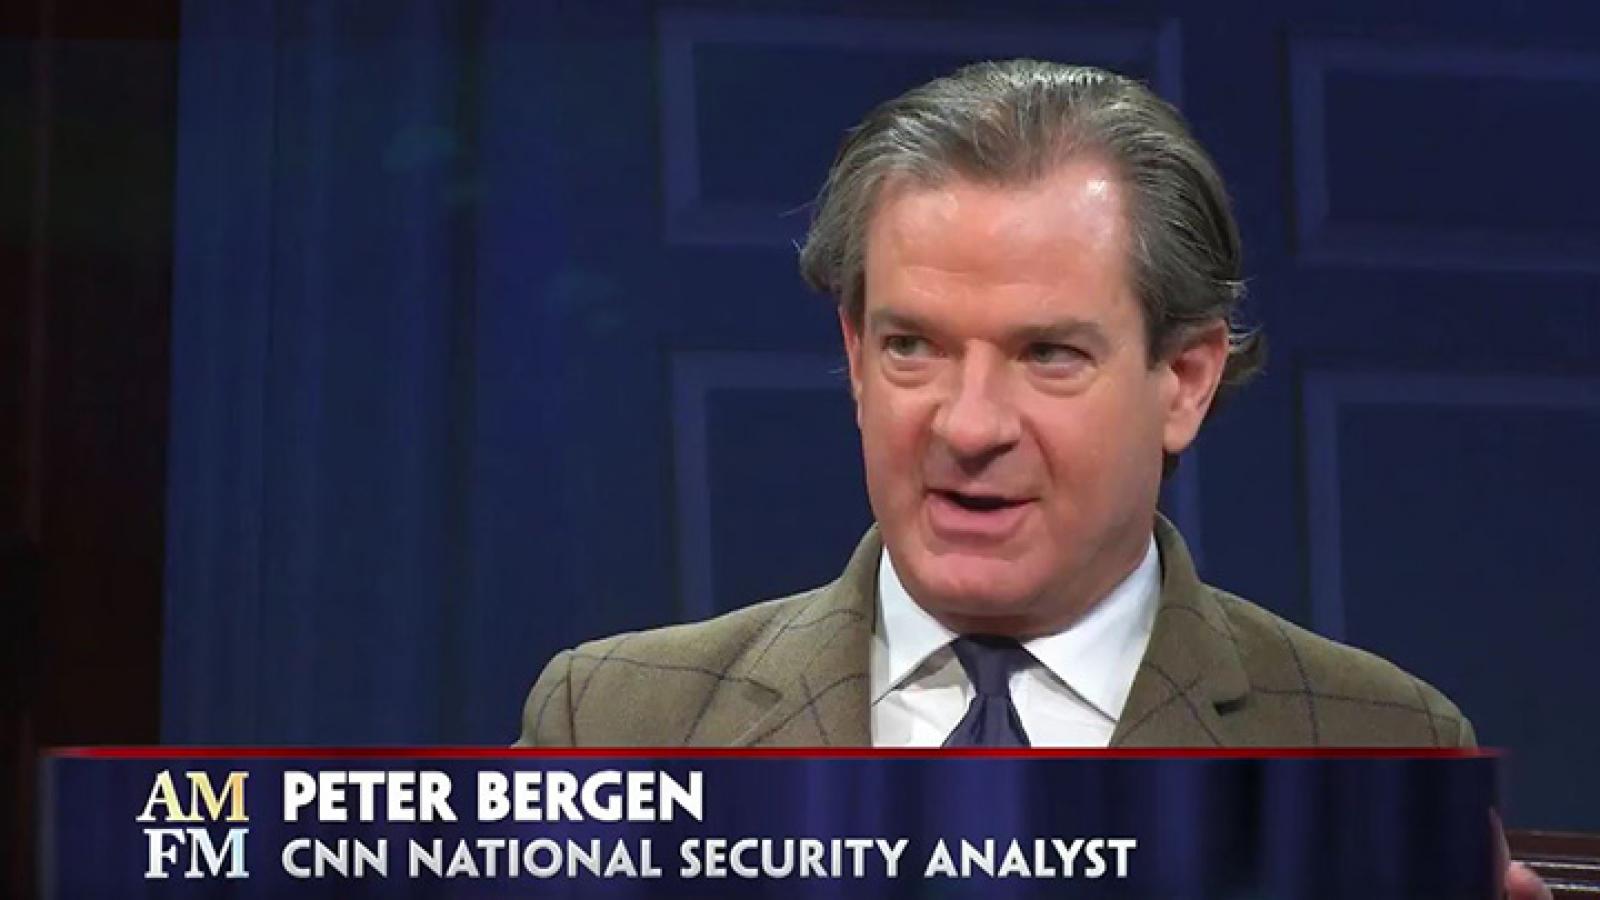 CNN's Peter Bergen looks at the terrorist group ISIS